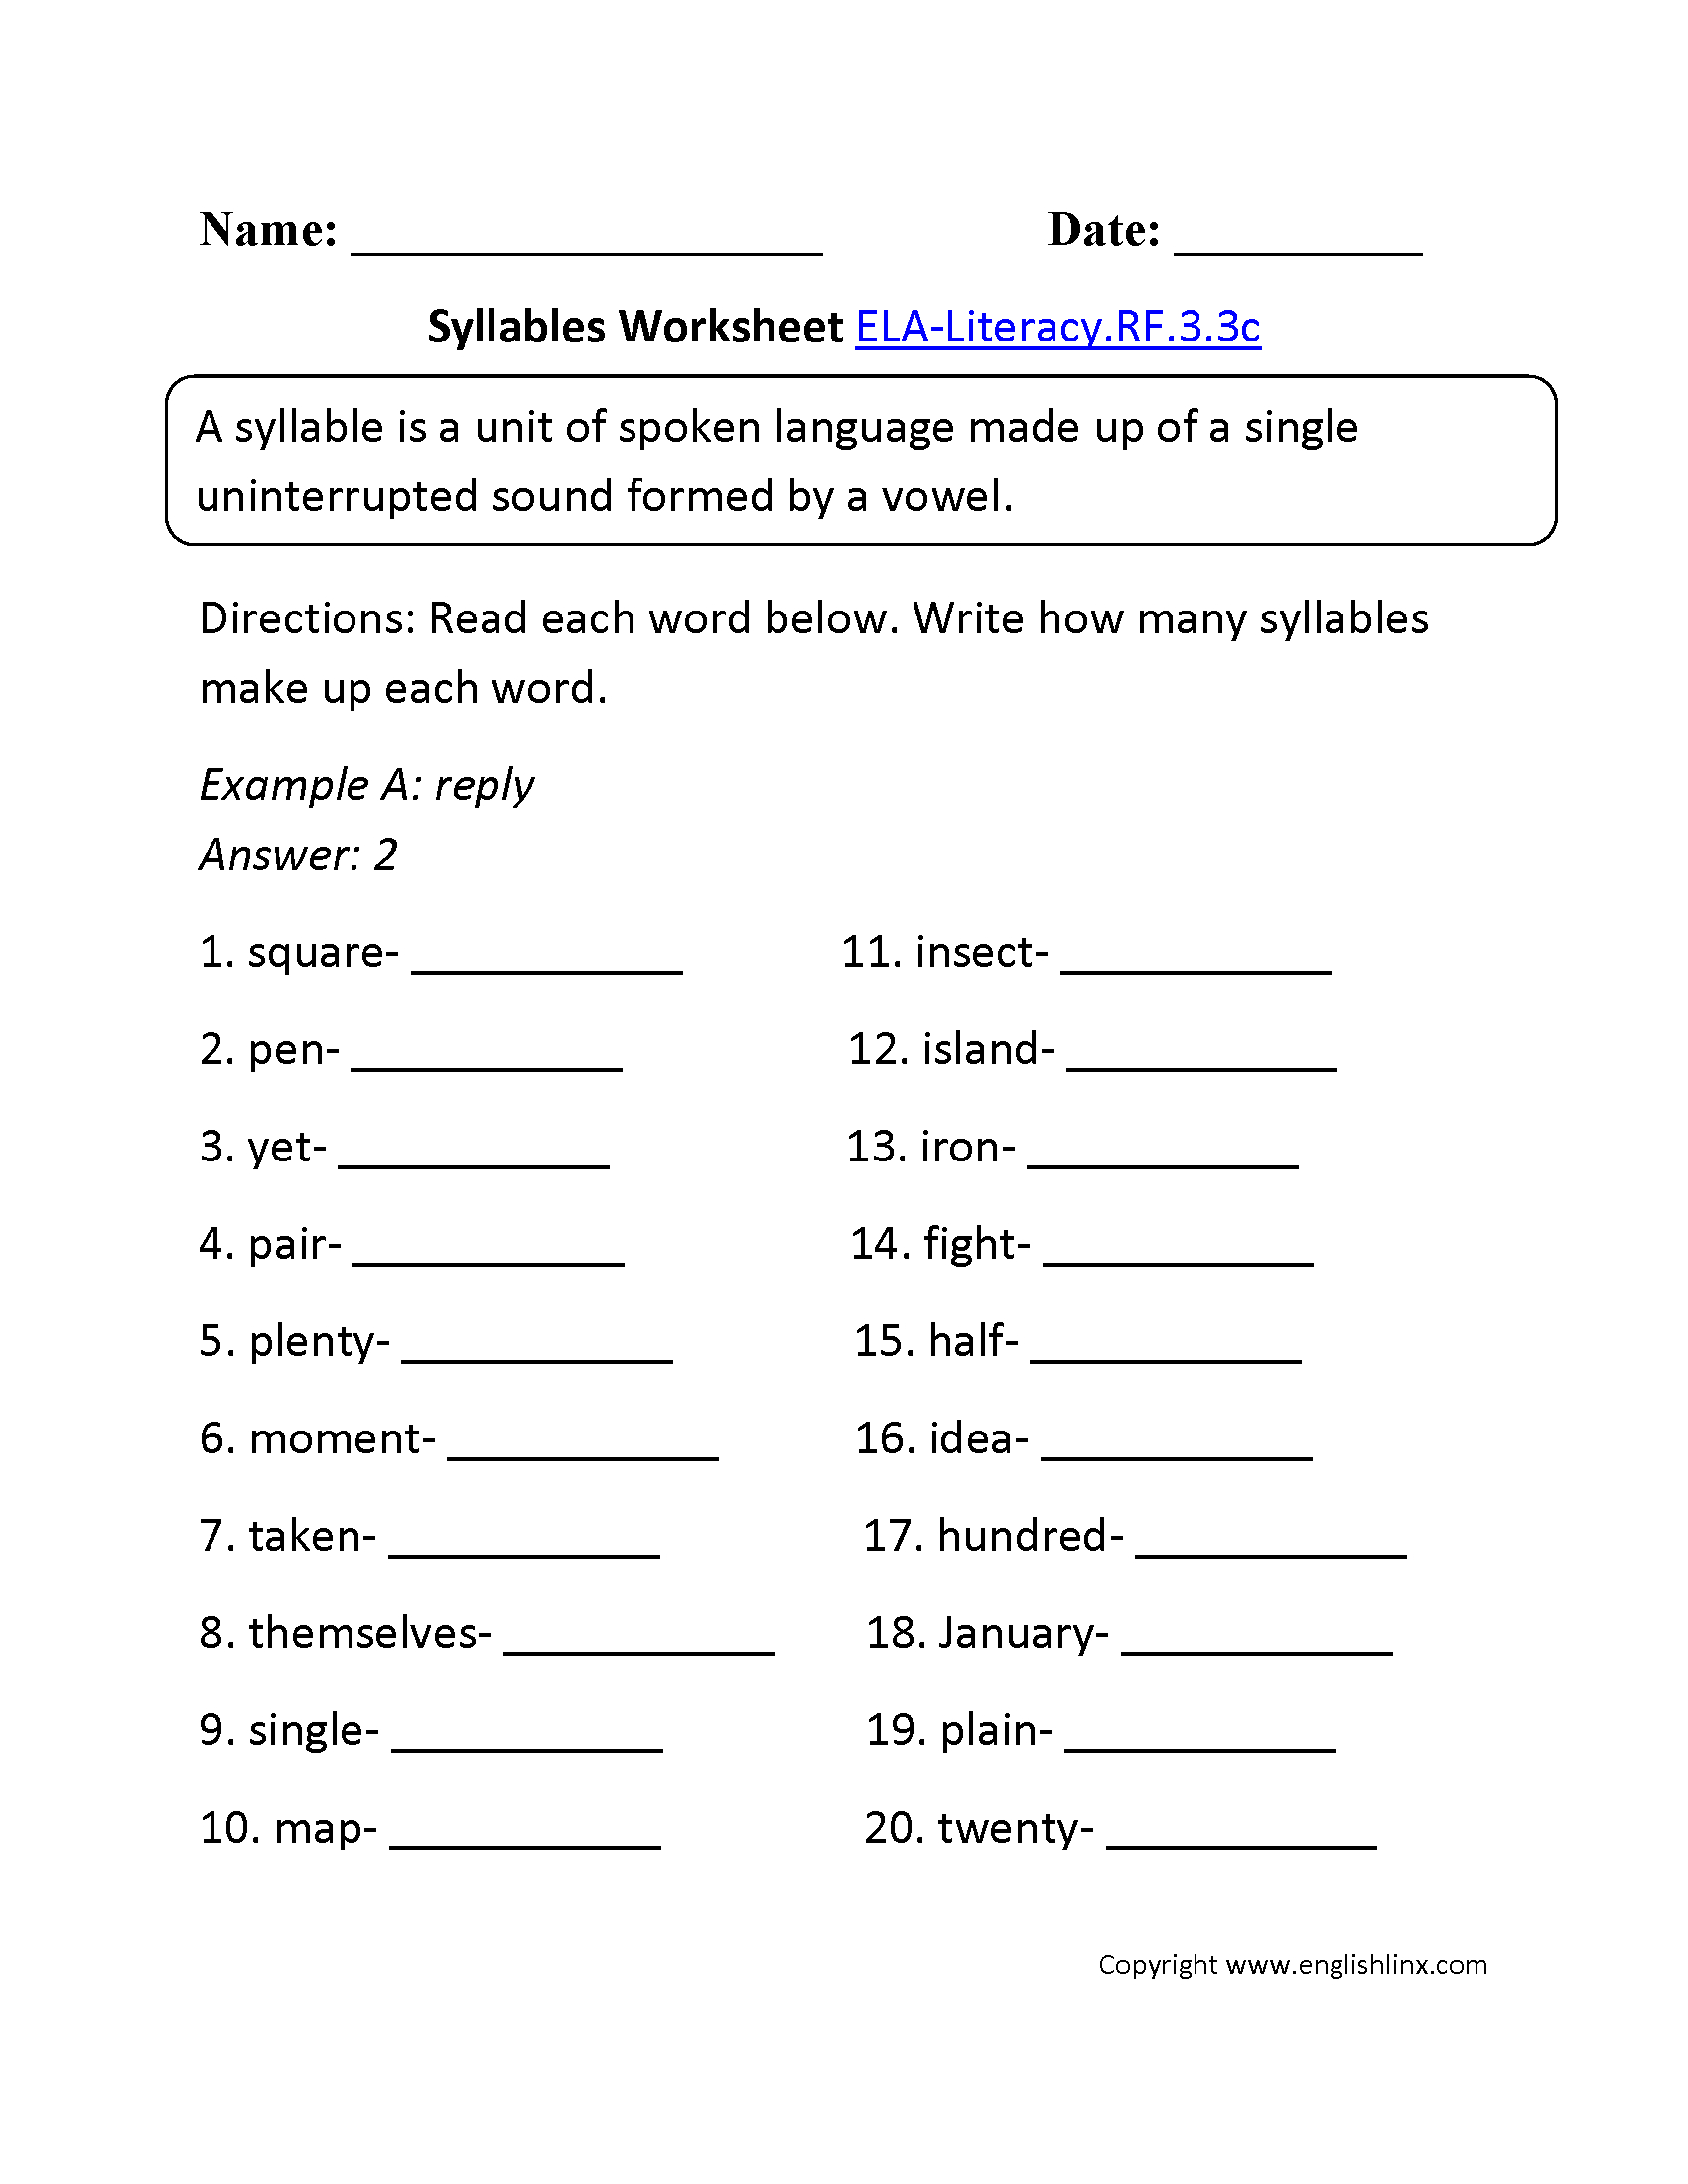 Syllables Worksheet 1 Ela-Literacy.rf.3.3C Reading Foundational - Free Printable Common Core Math Worksheets For Third Grade